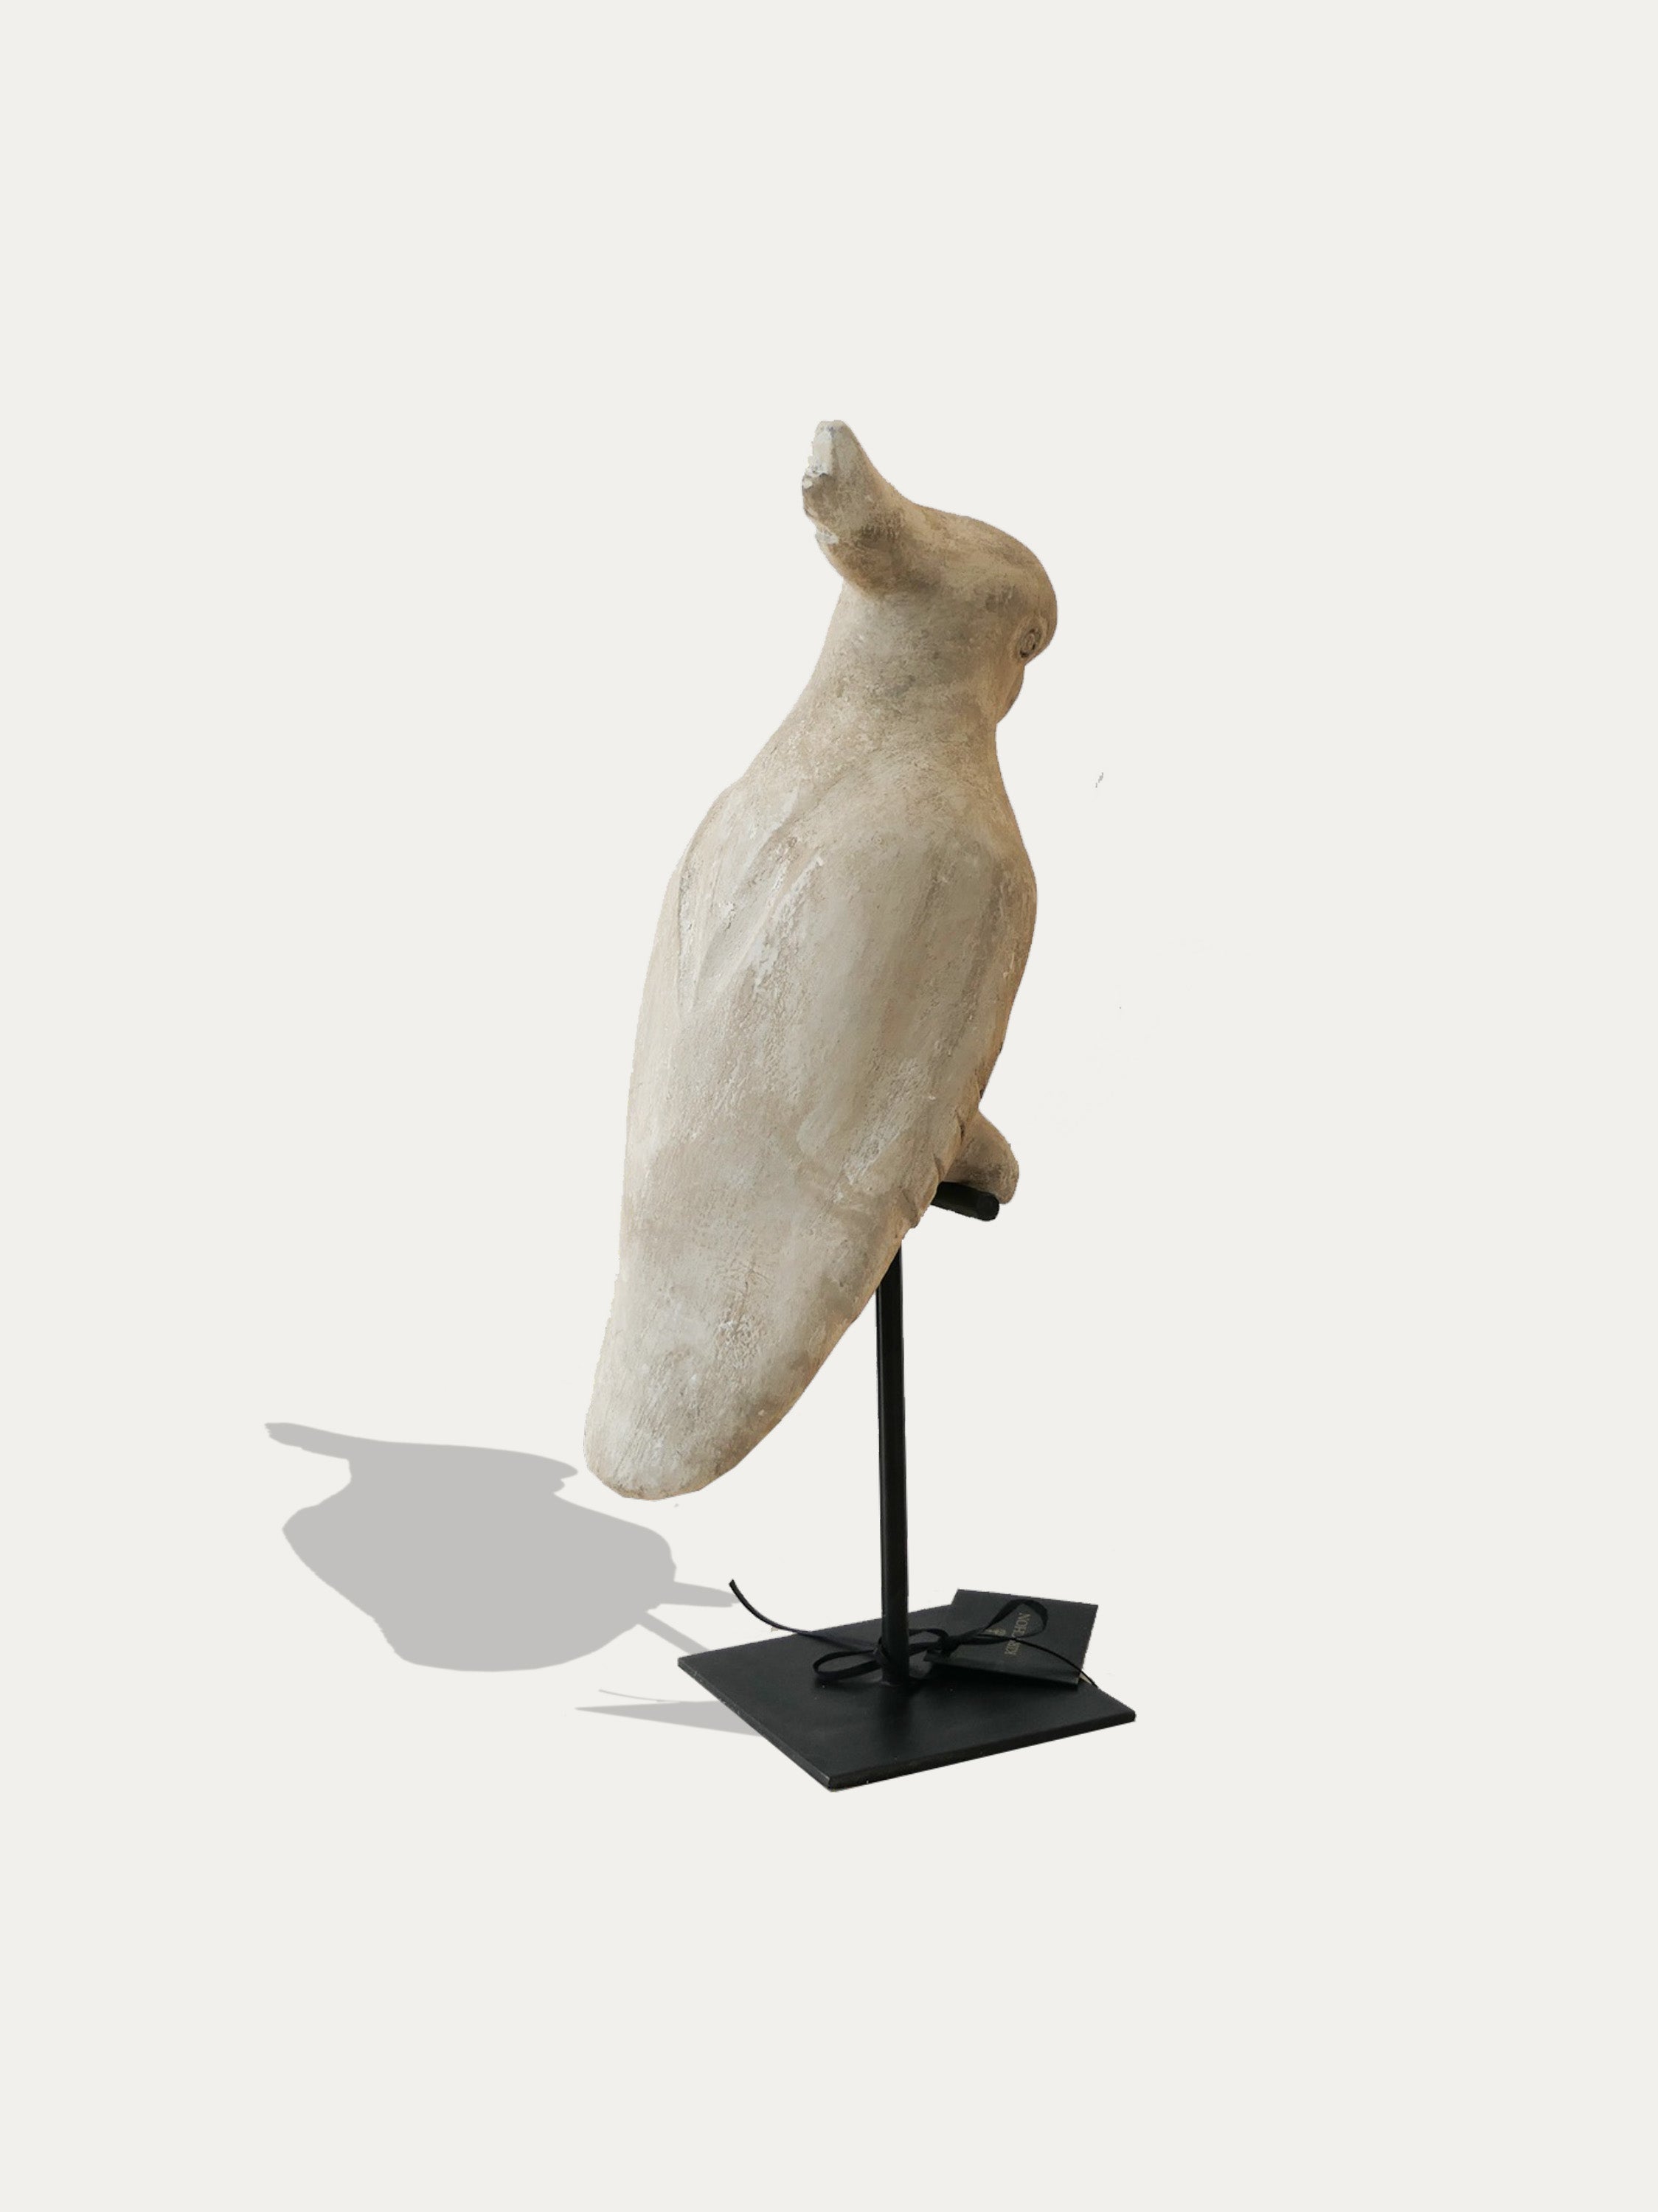 Crested cockatoo statue from Timor - Asian Art from Kirschon